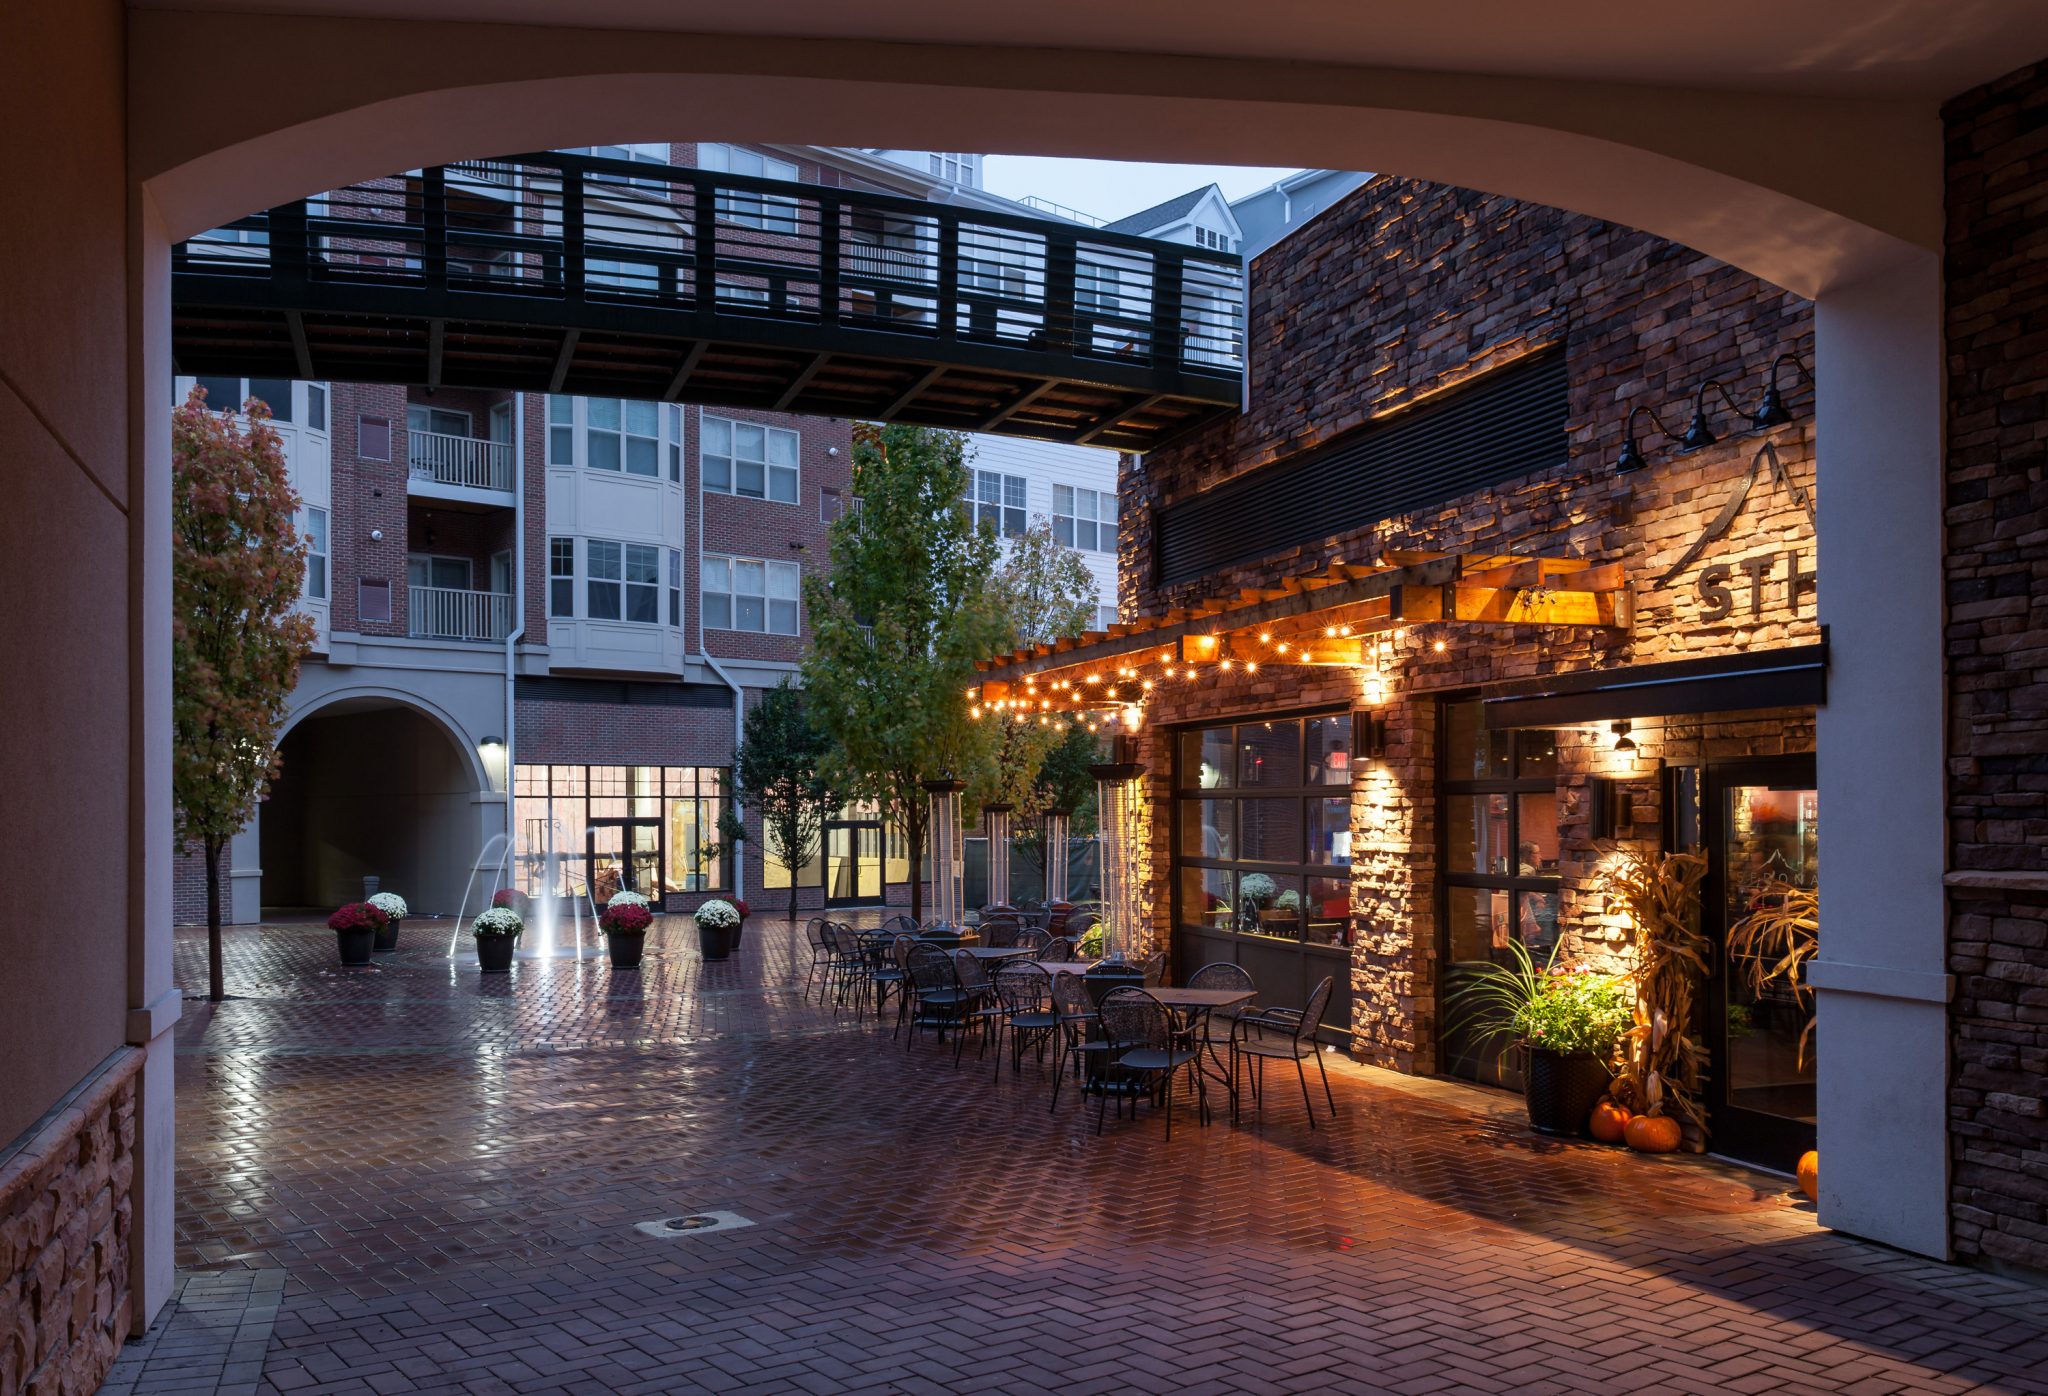 Exterior of courtyard with restaurant, fountain, and overhead walkway with apartment building in background